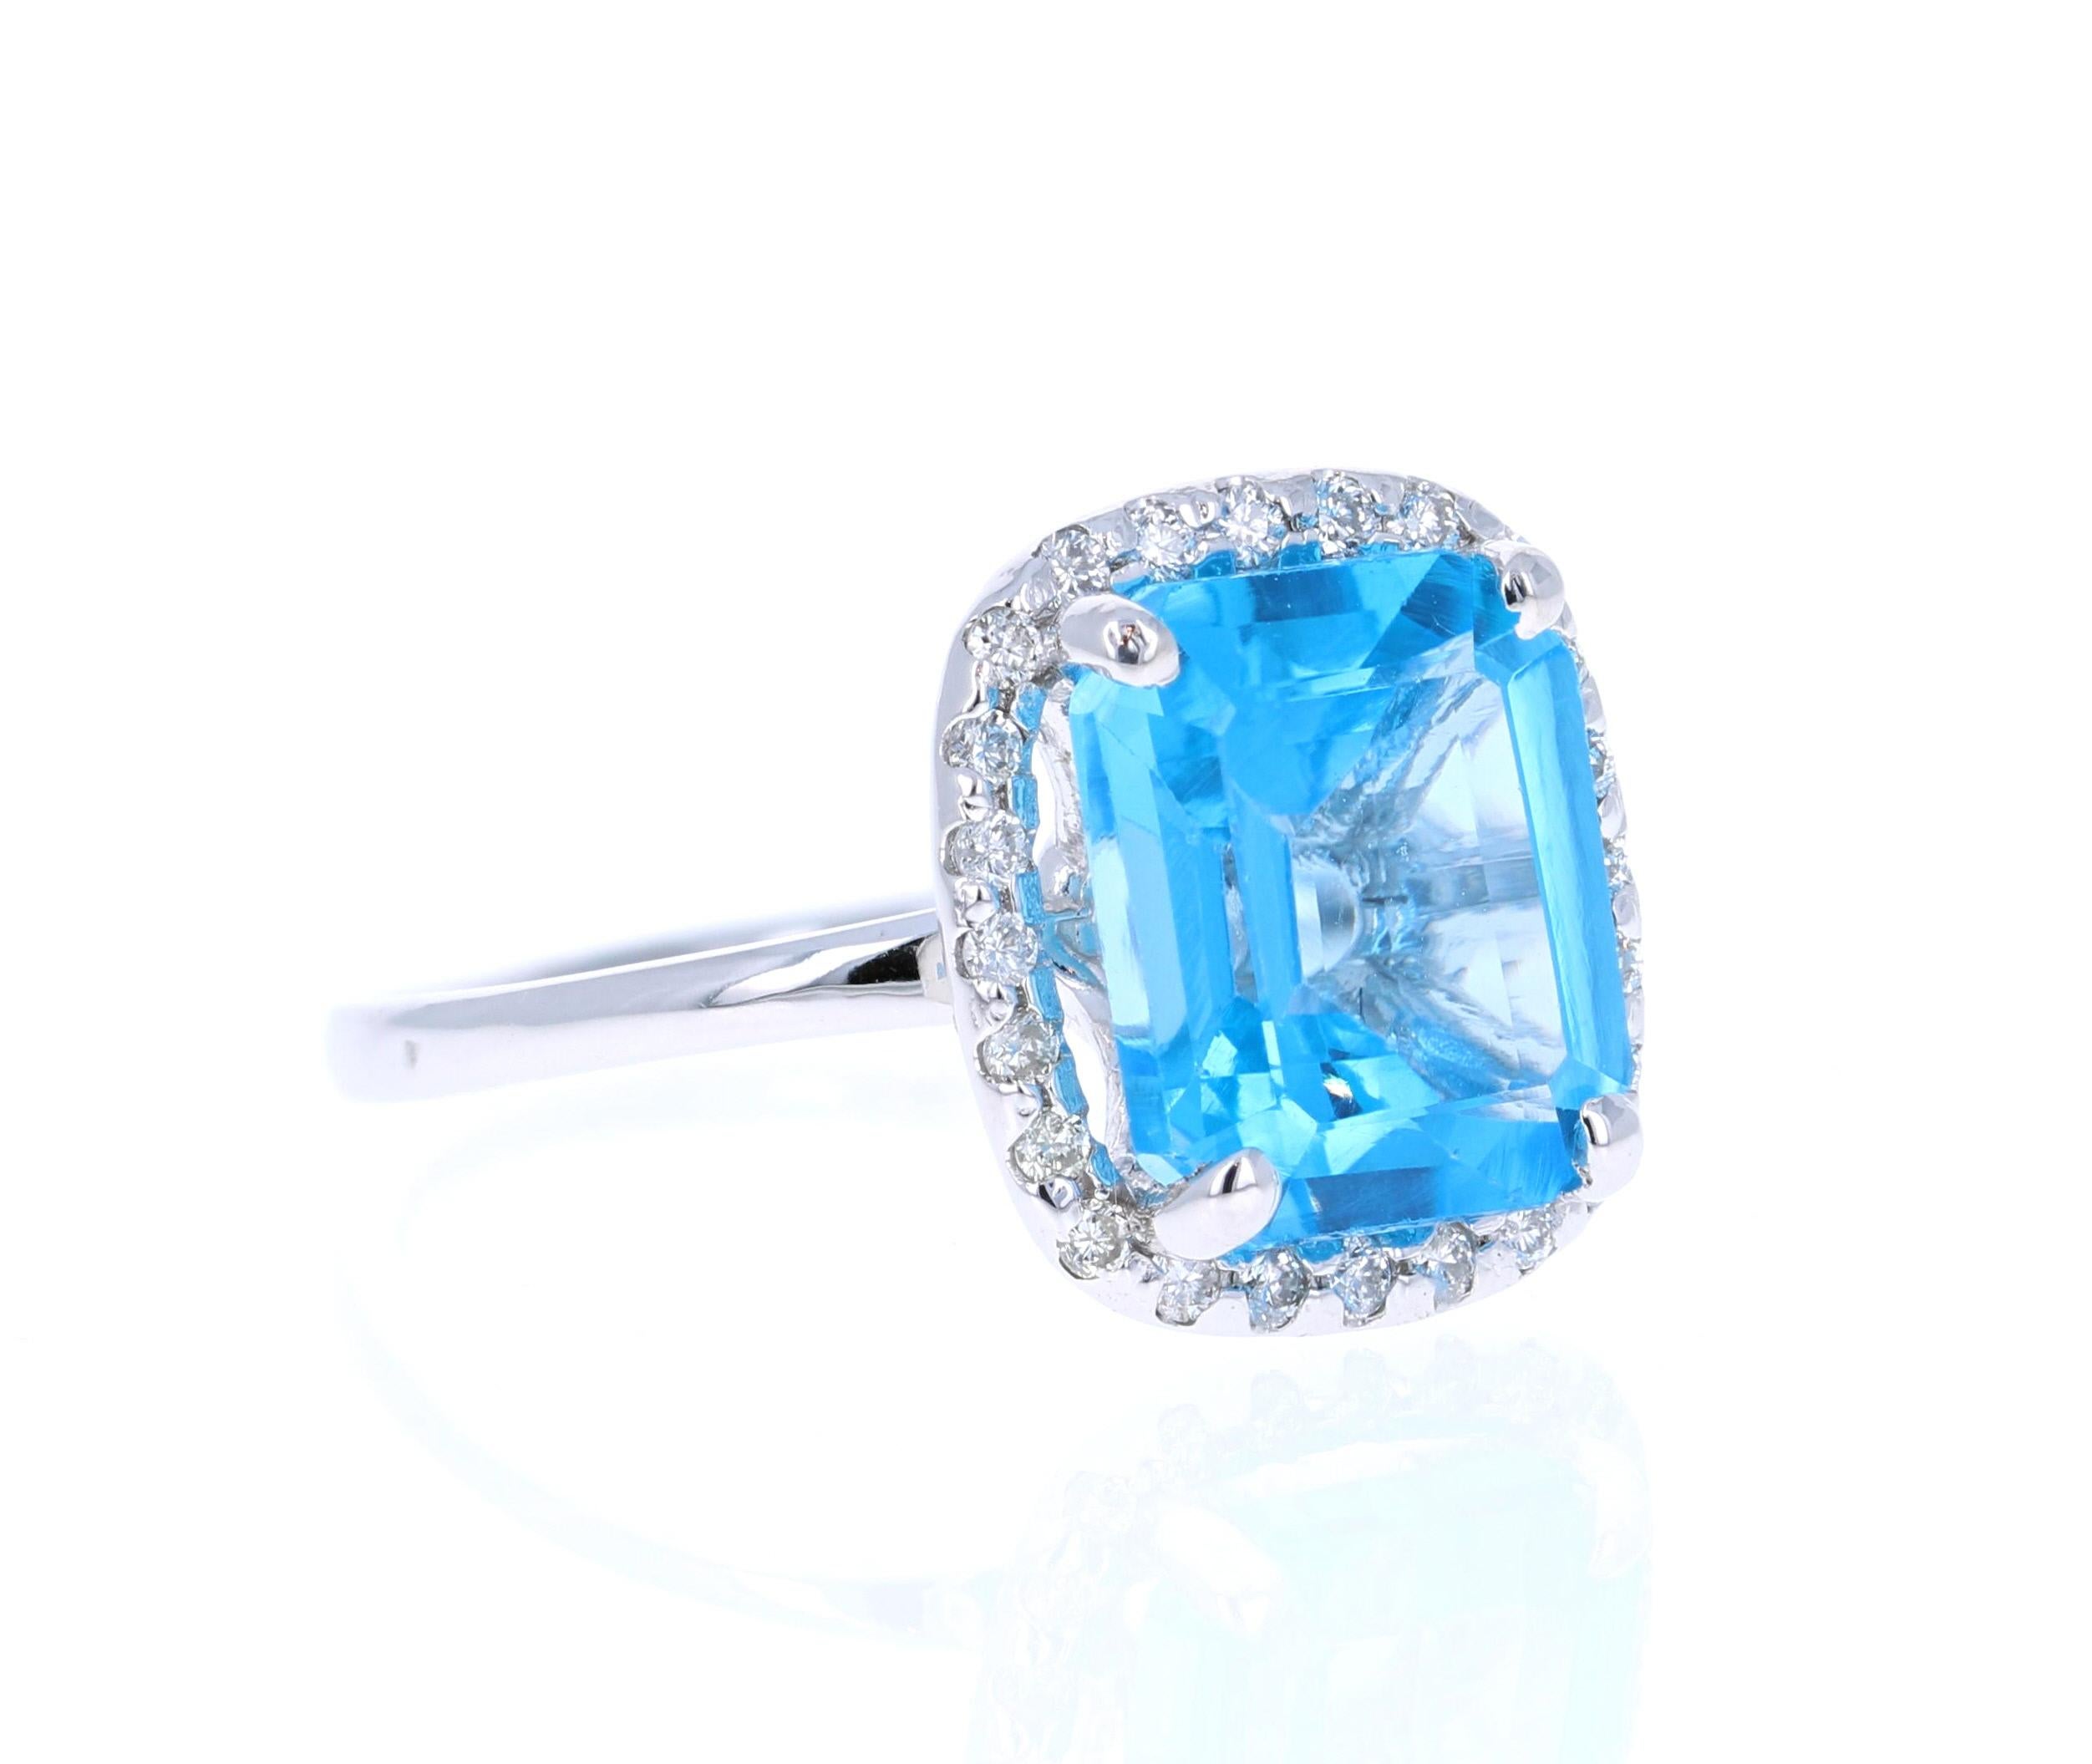 This Oval Cut Blue Topaz Diamond ring has a 5.27 Carat Blue Topaz and is surrounded by 24 Round Cut Diamonds that weigh 0.24 Carats. The total carat weight of the ring is 5.51 Carats. (Clarity of Diamonds: SI, Color of Diamonds: F) 

The setting is